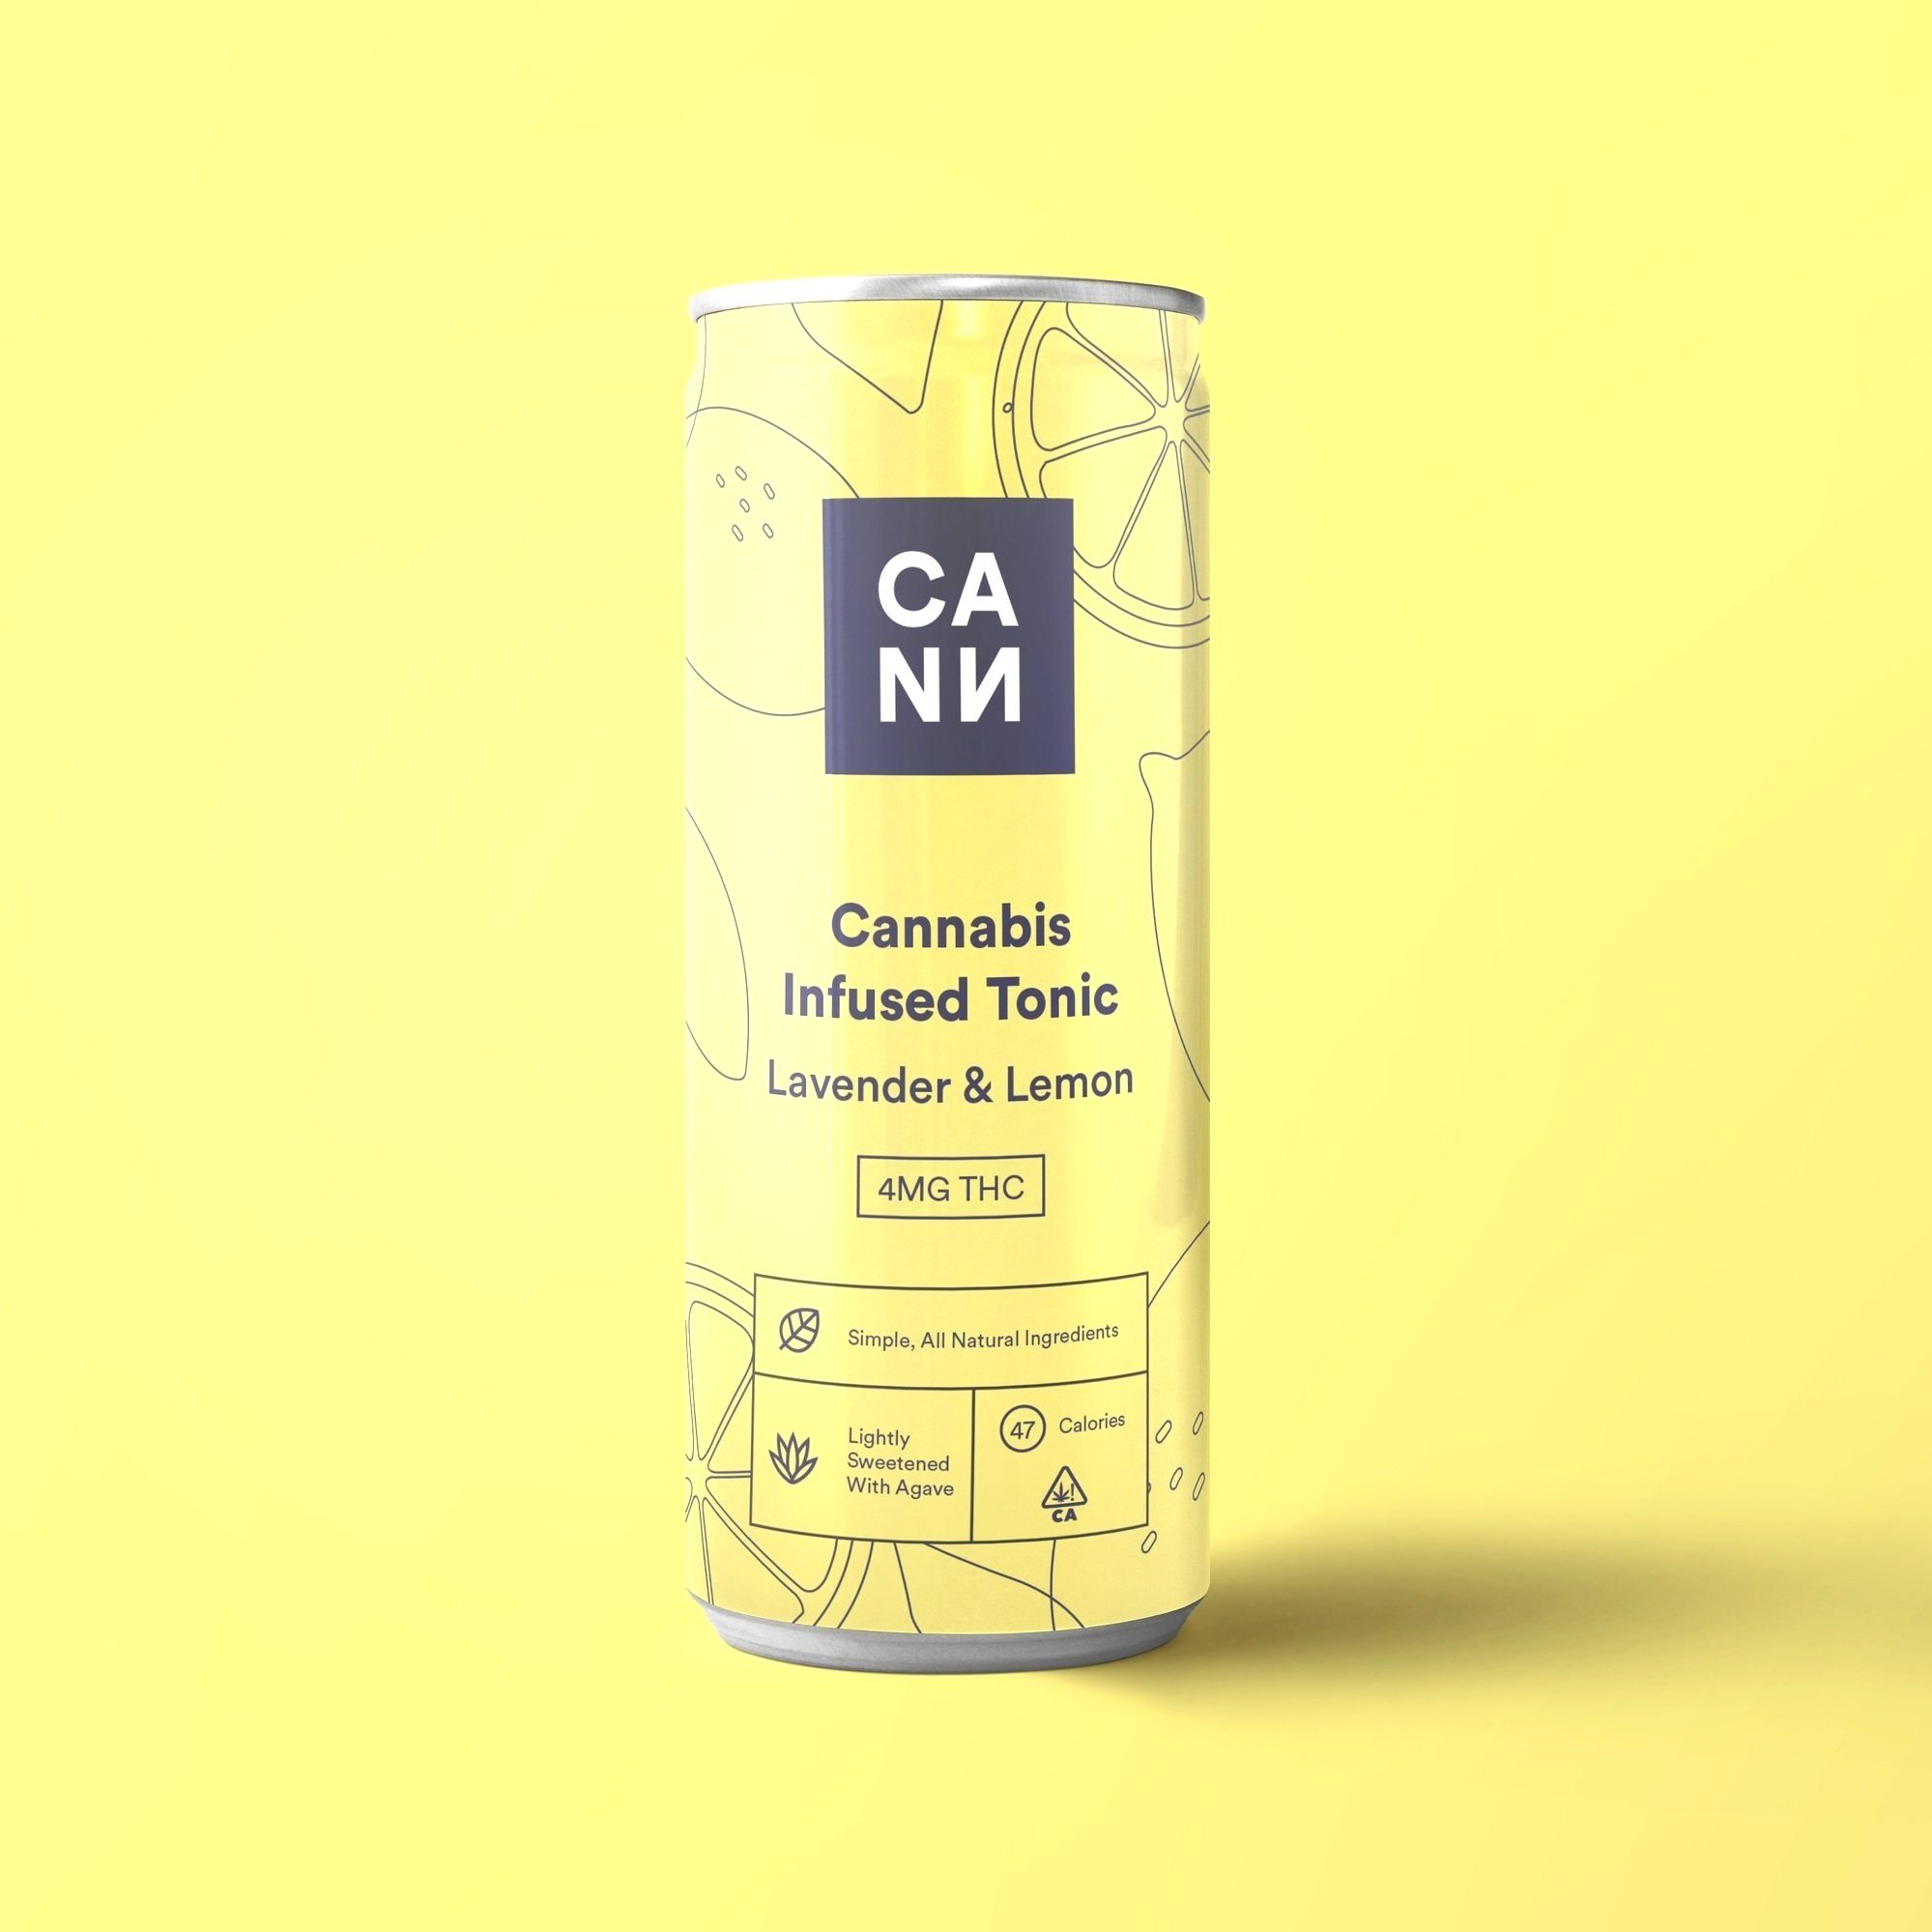 Freelance-graphic-designer-Cann design for drink cann - yellow and line illustrations and logo